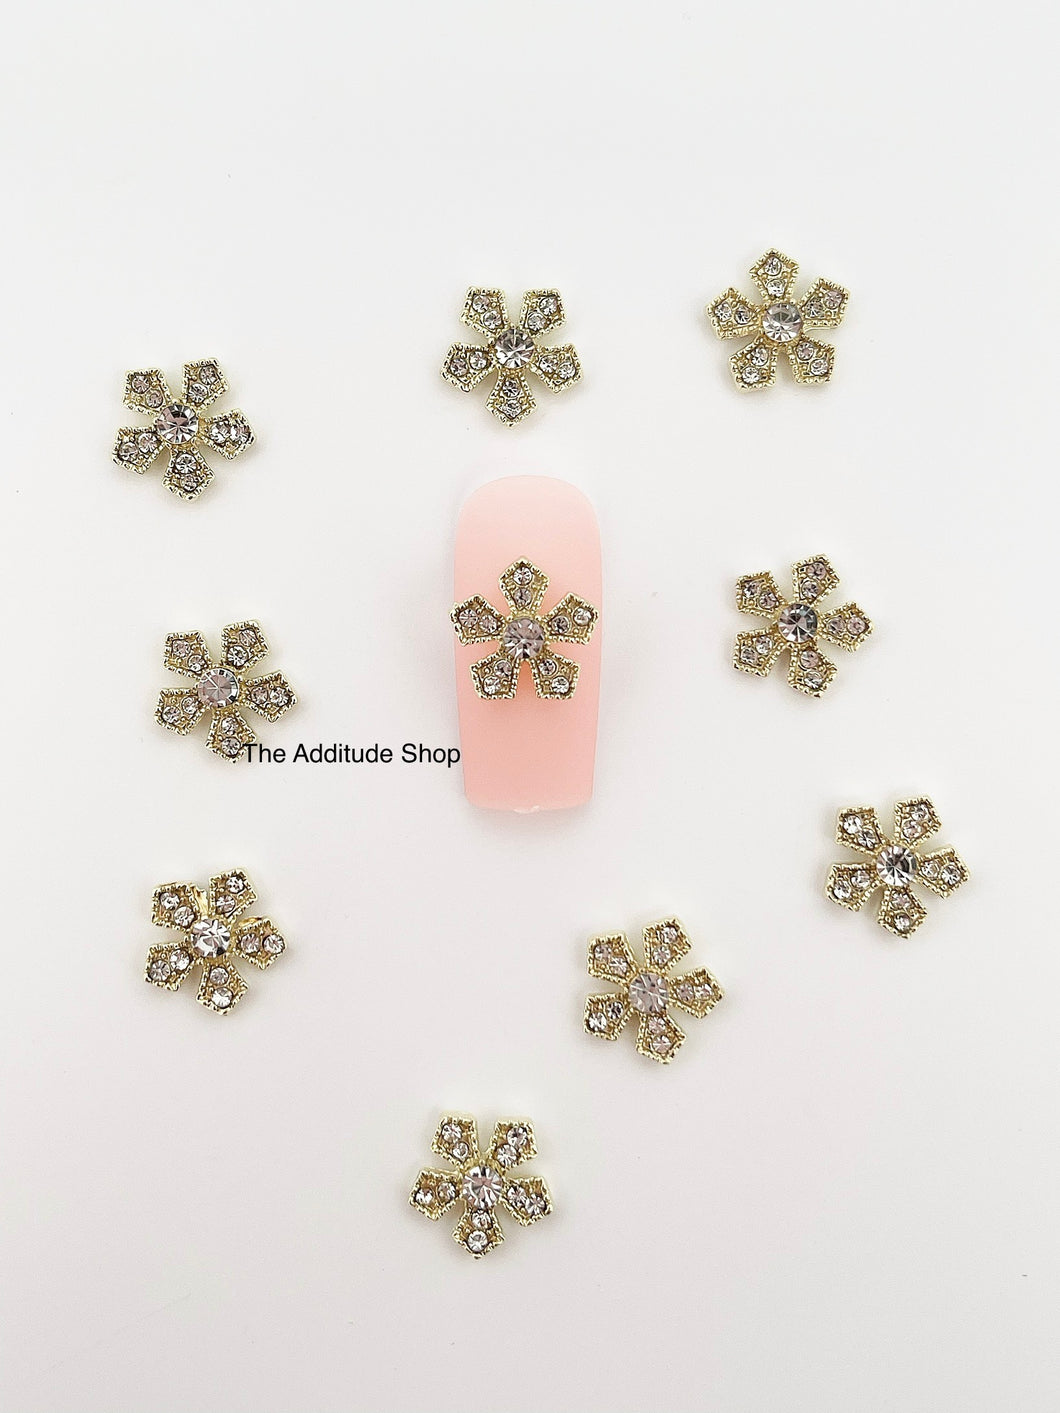 Alloy Nail Charms Decorations #1- 10 Pieces